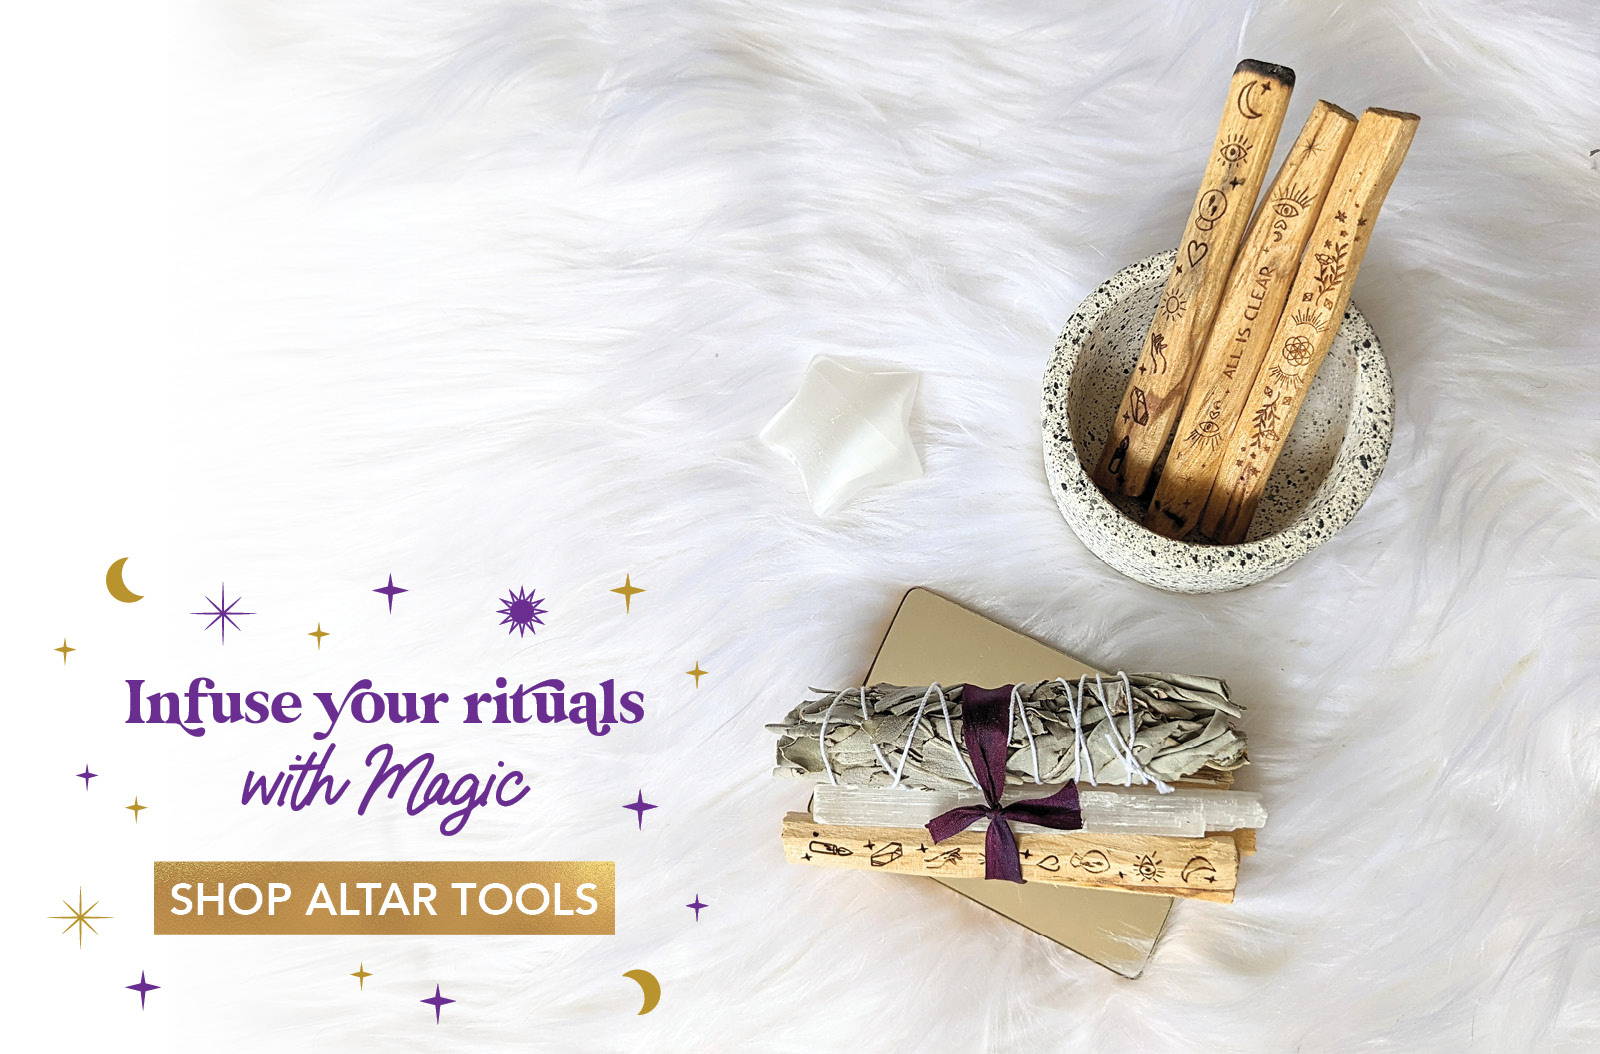 Infuse your rituals with magic - shop altar tools